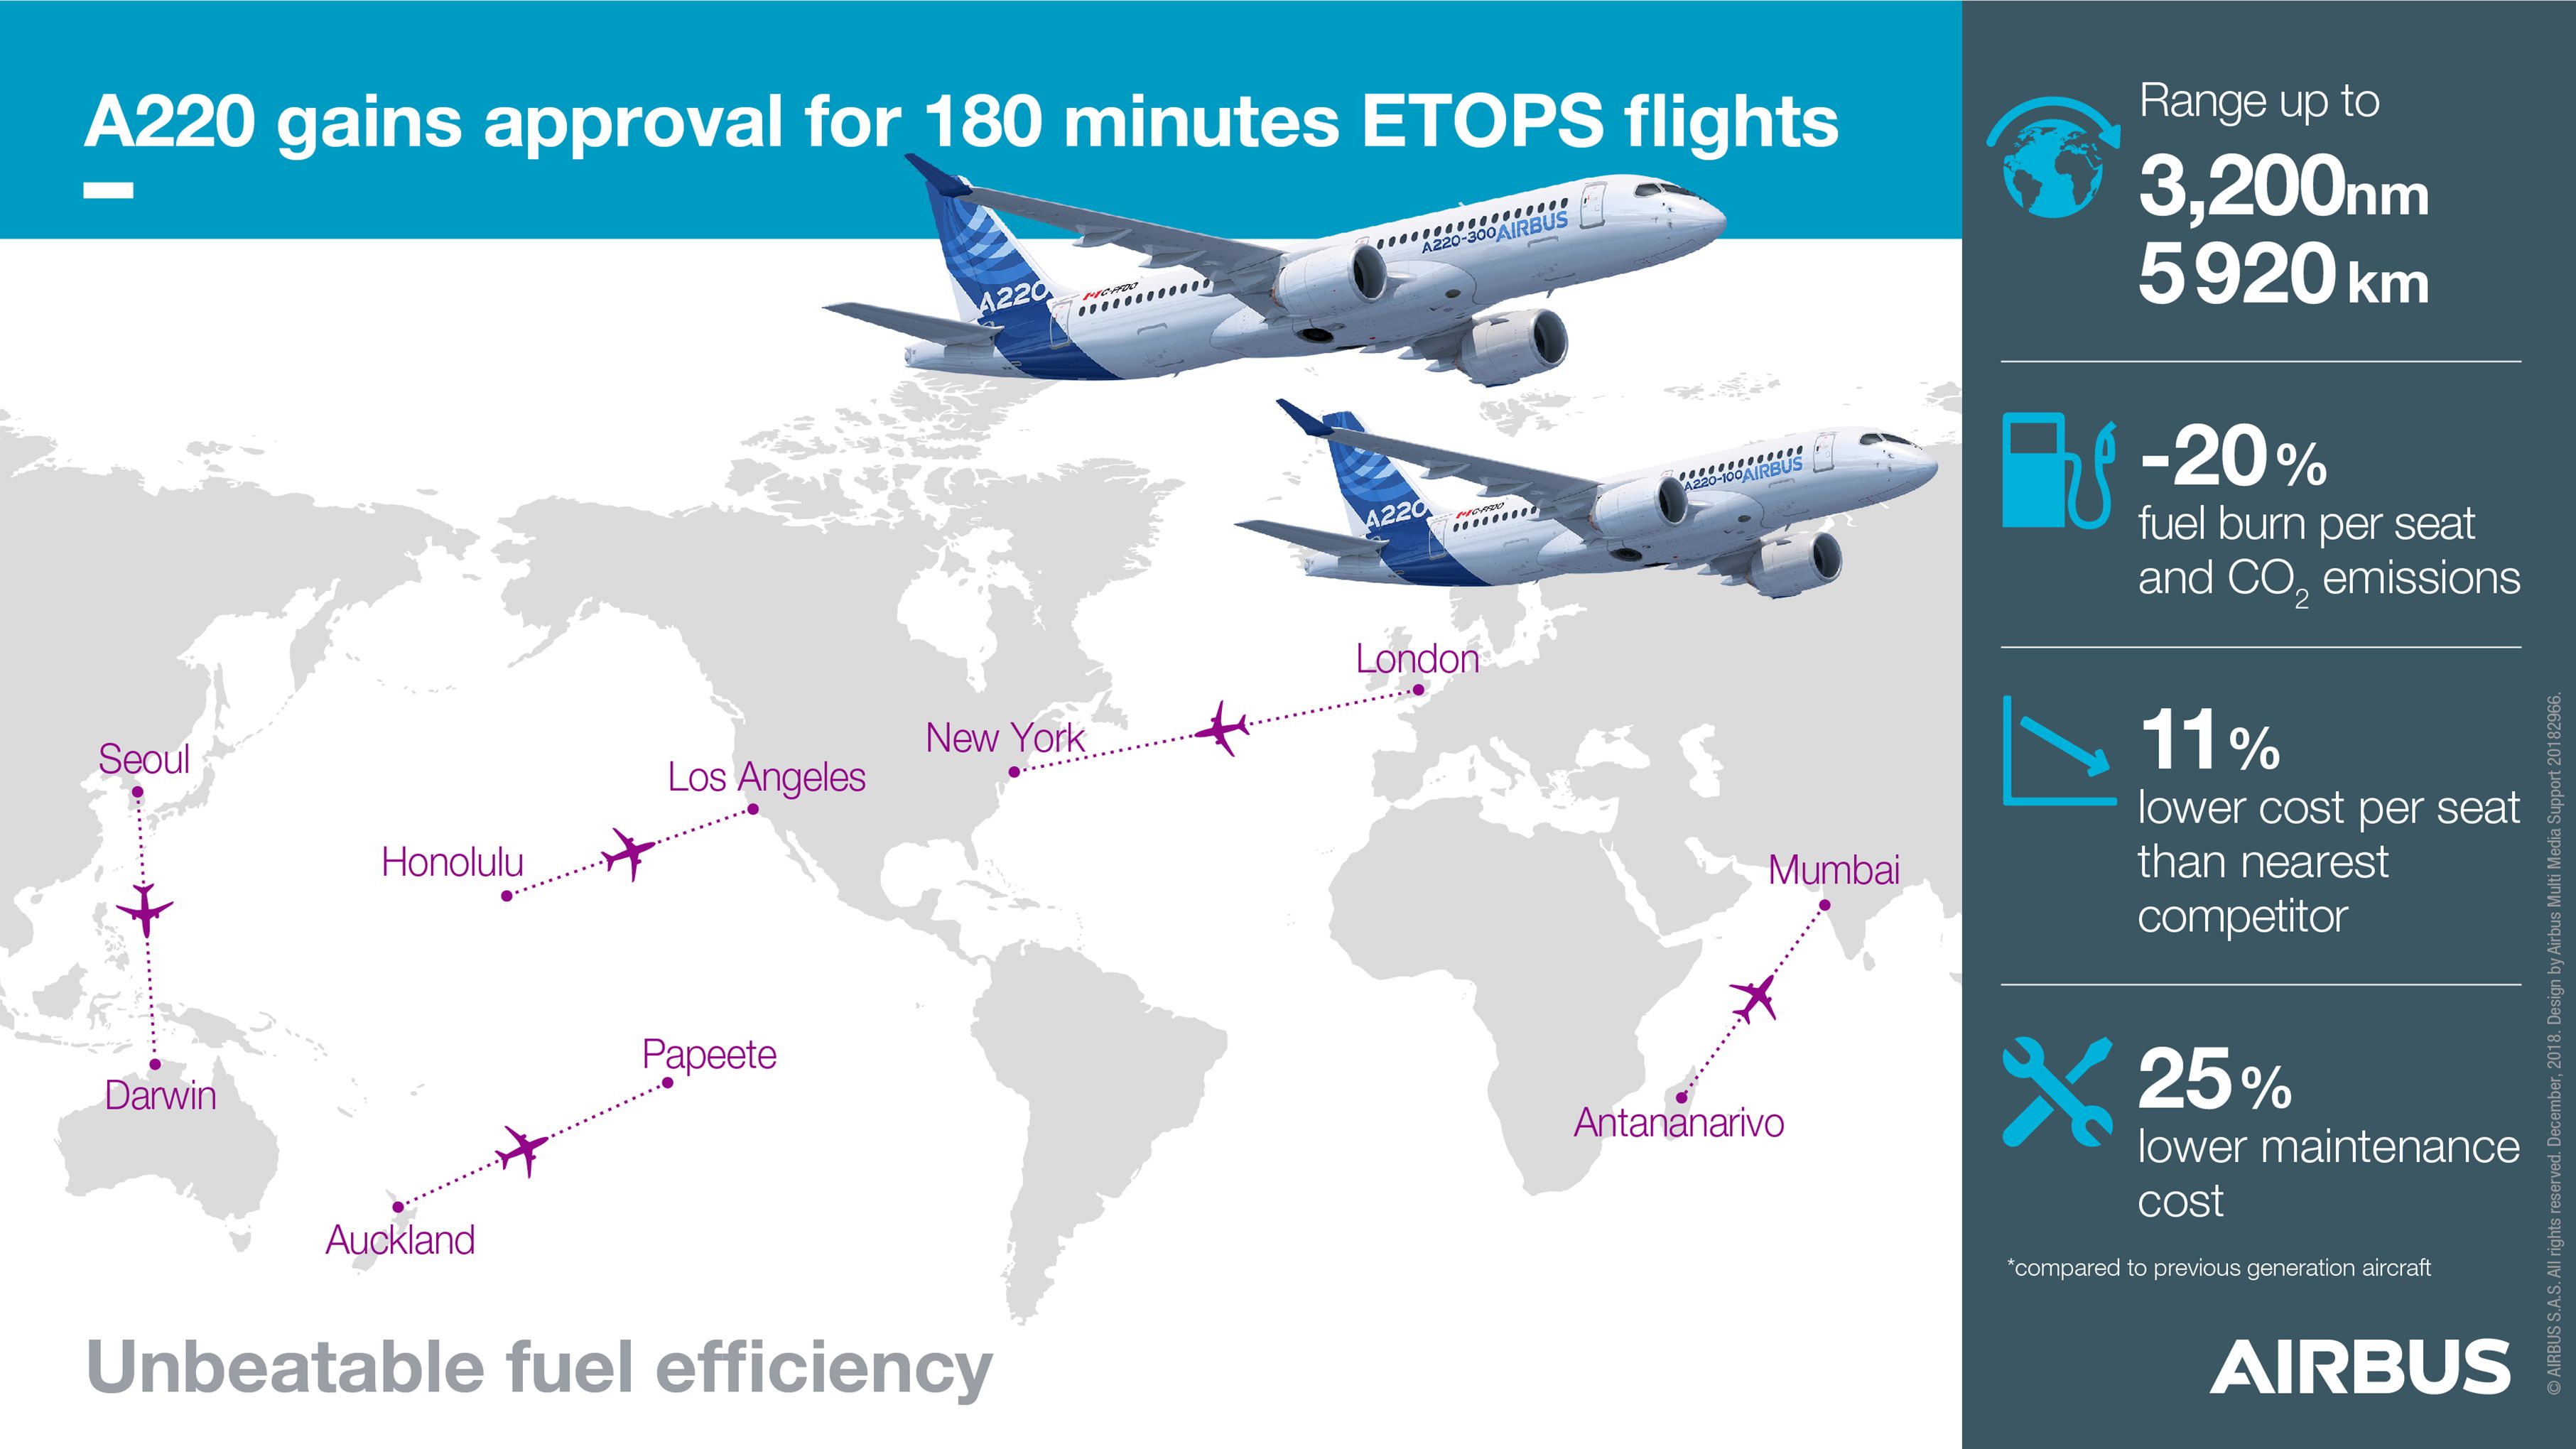 Airbus A220 ETOPS